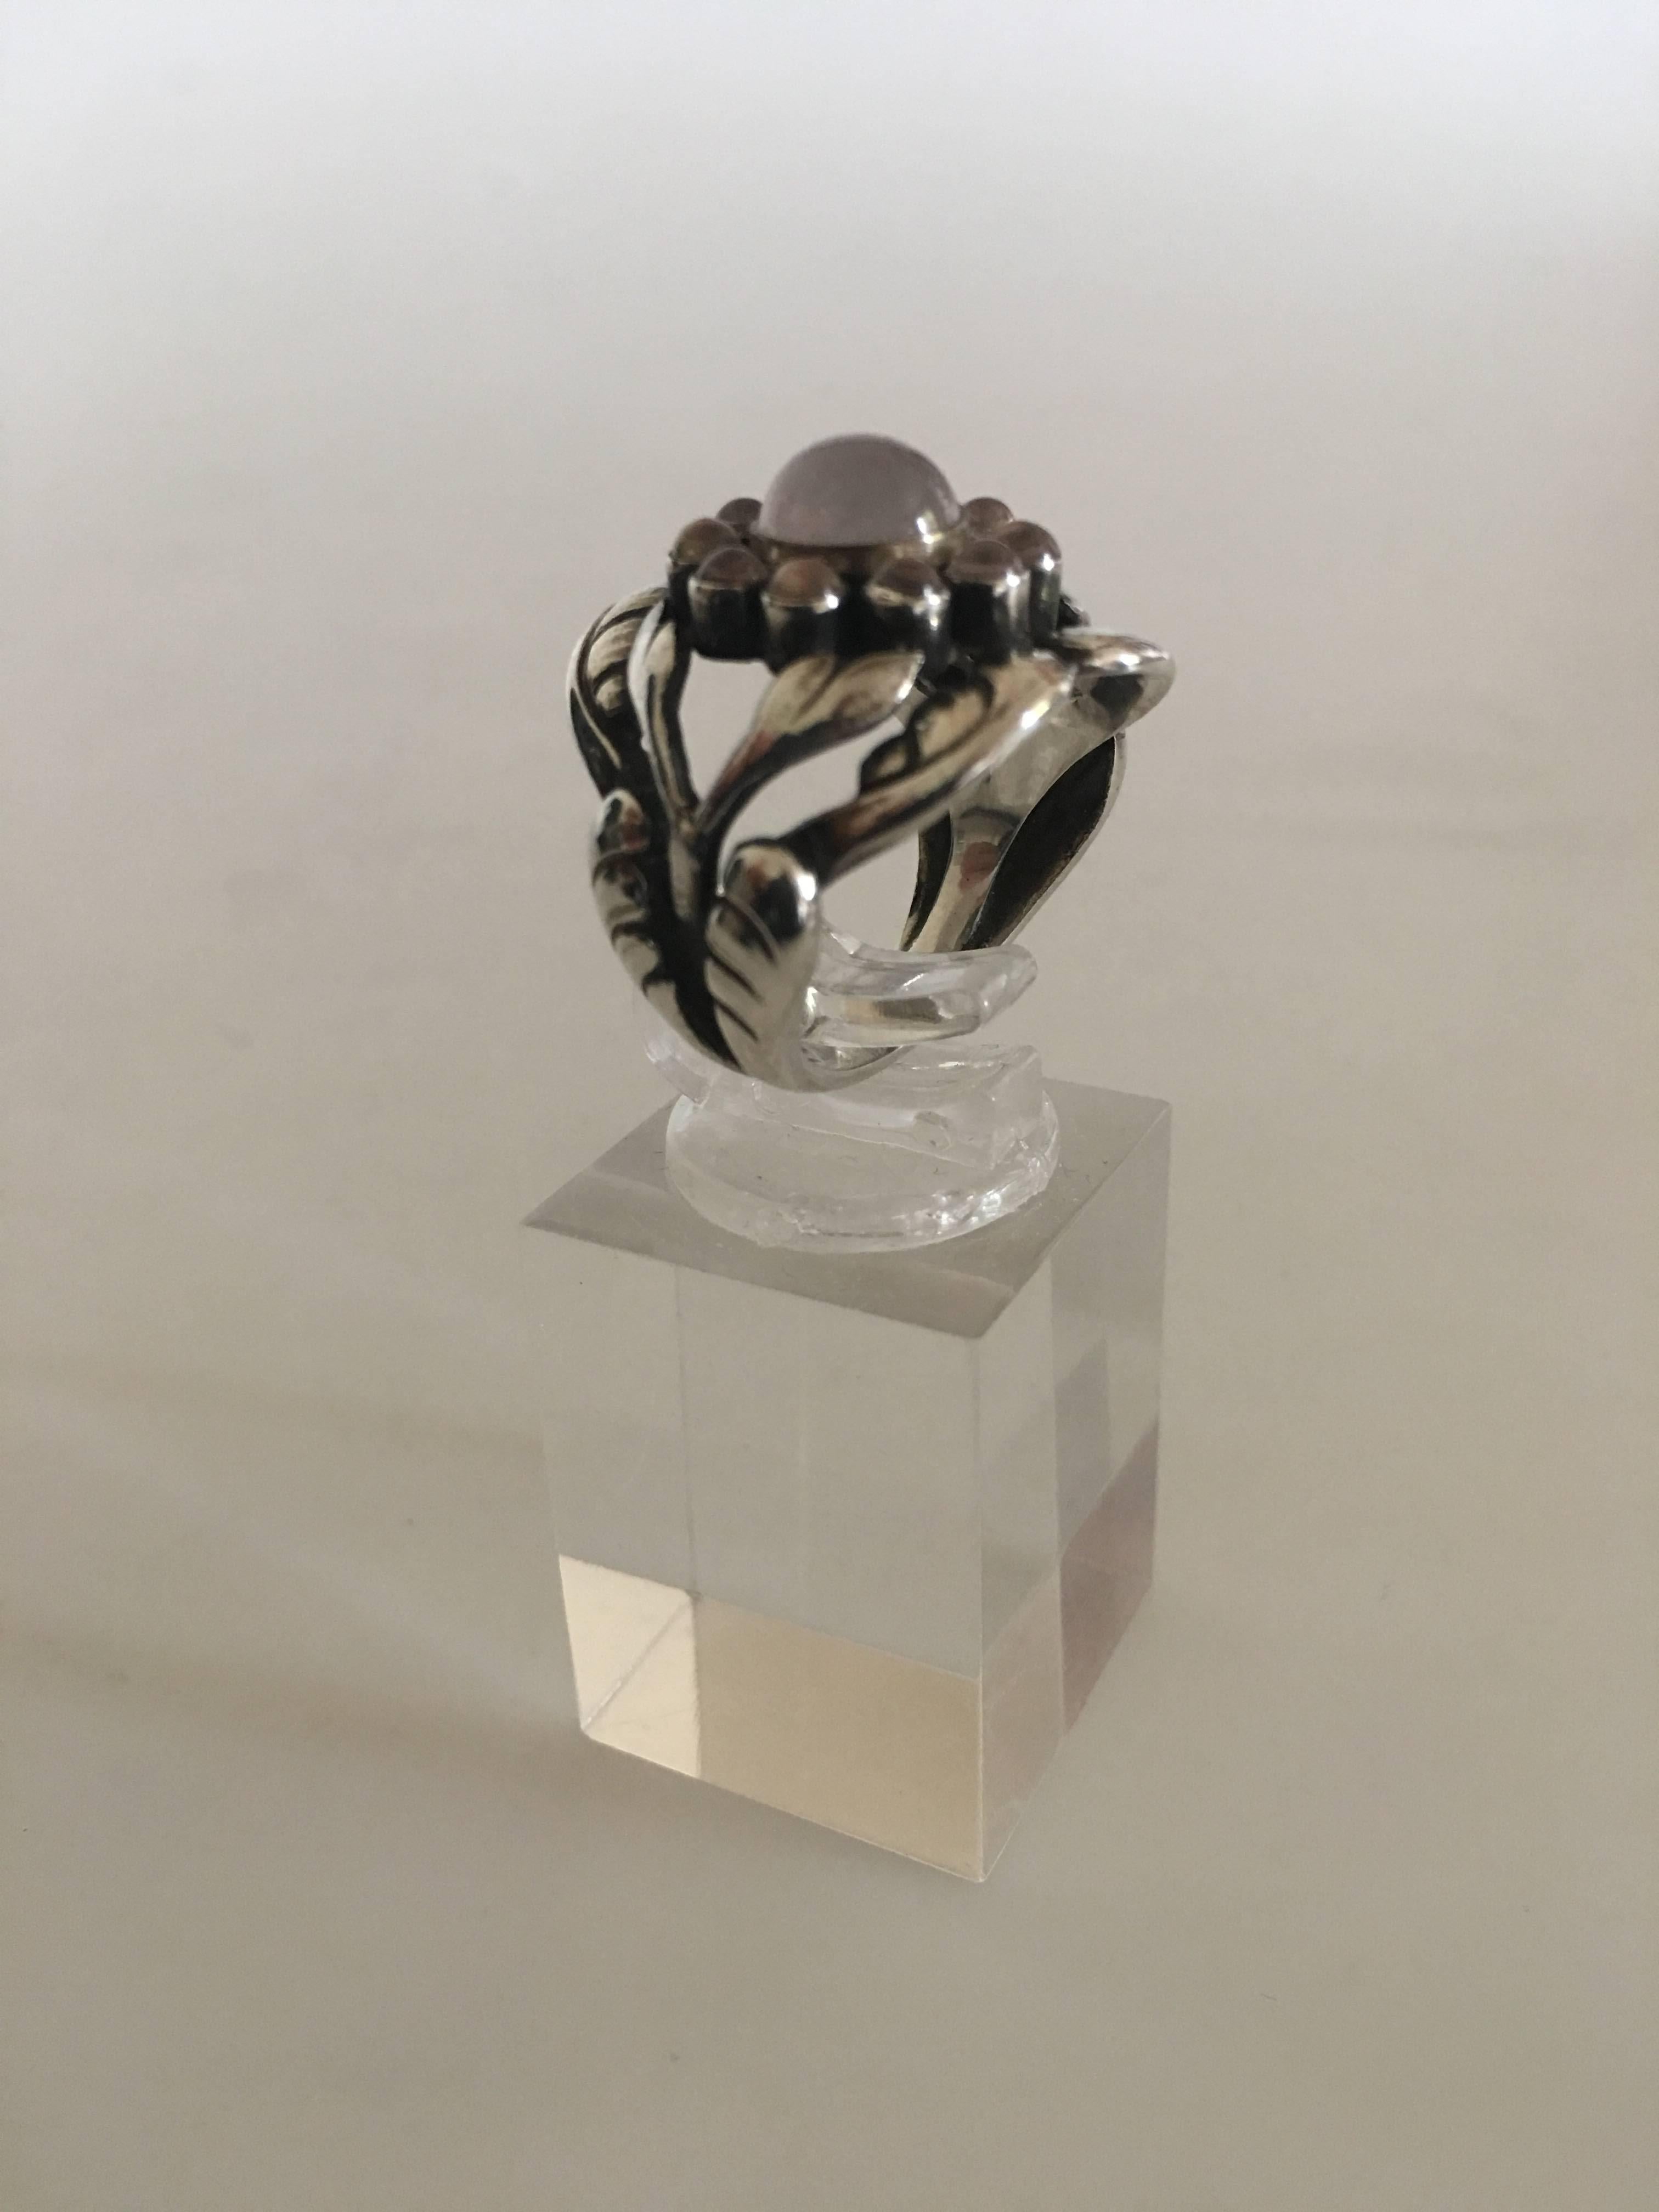 Georg Jensen Sterling Silver Ring No. 10 with Rose Quartz. Size 50 (Us Size 5). Weighs 8 grams. Measures roughly 2 cm. Manufactured after 1945.